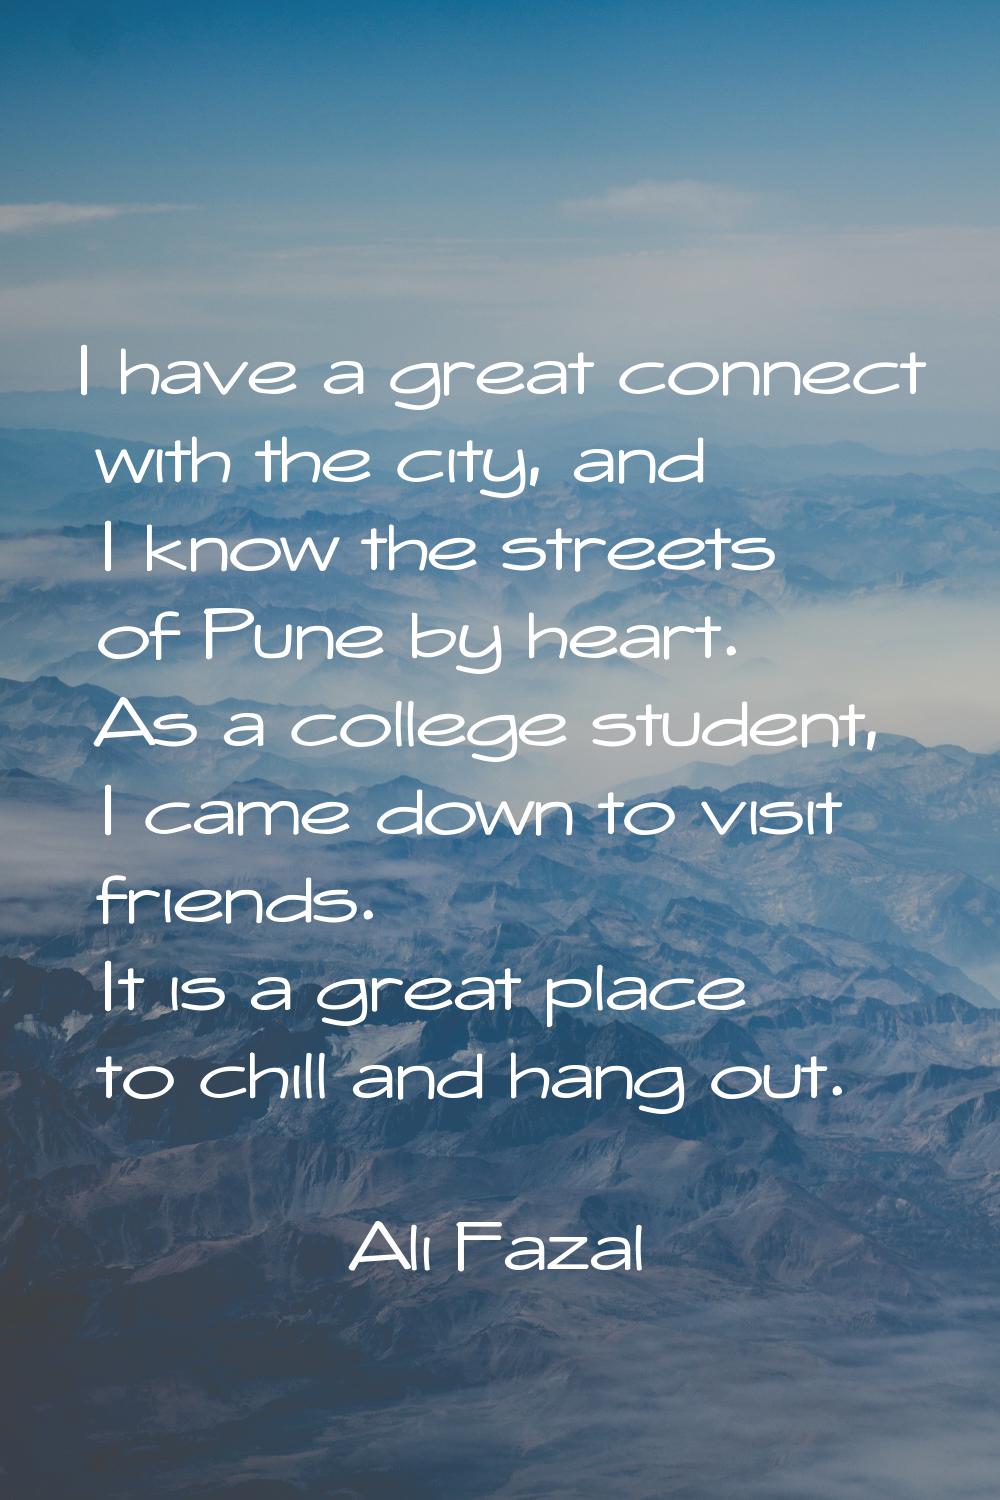 I have a great connect with the city, and I know the streets of Pune by heart. As a college student